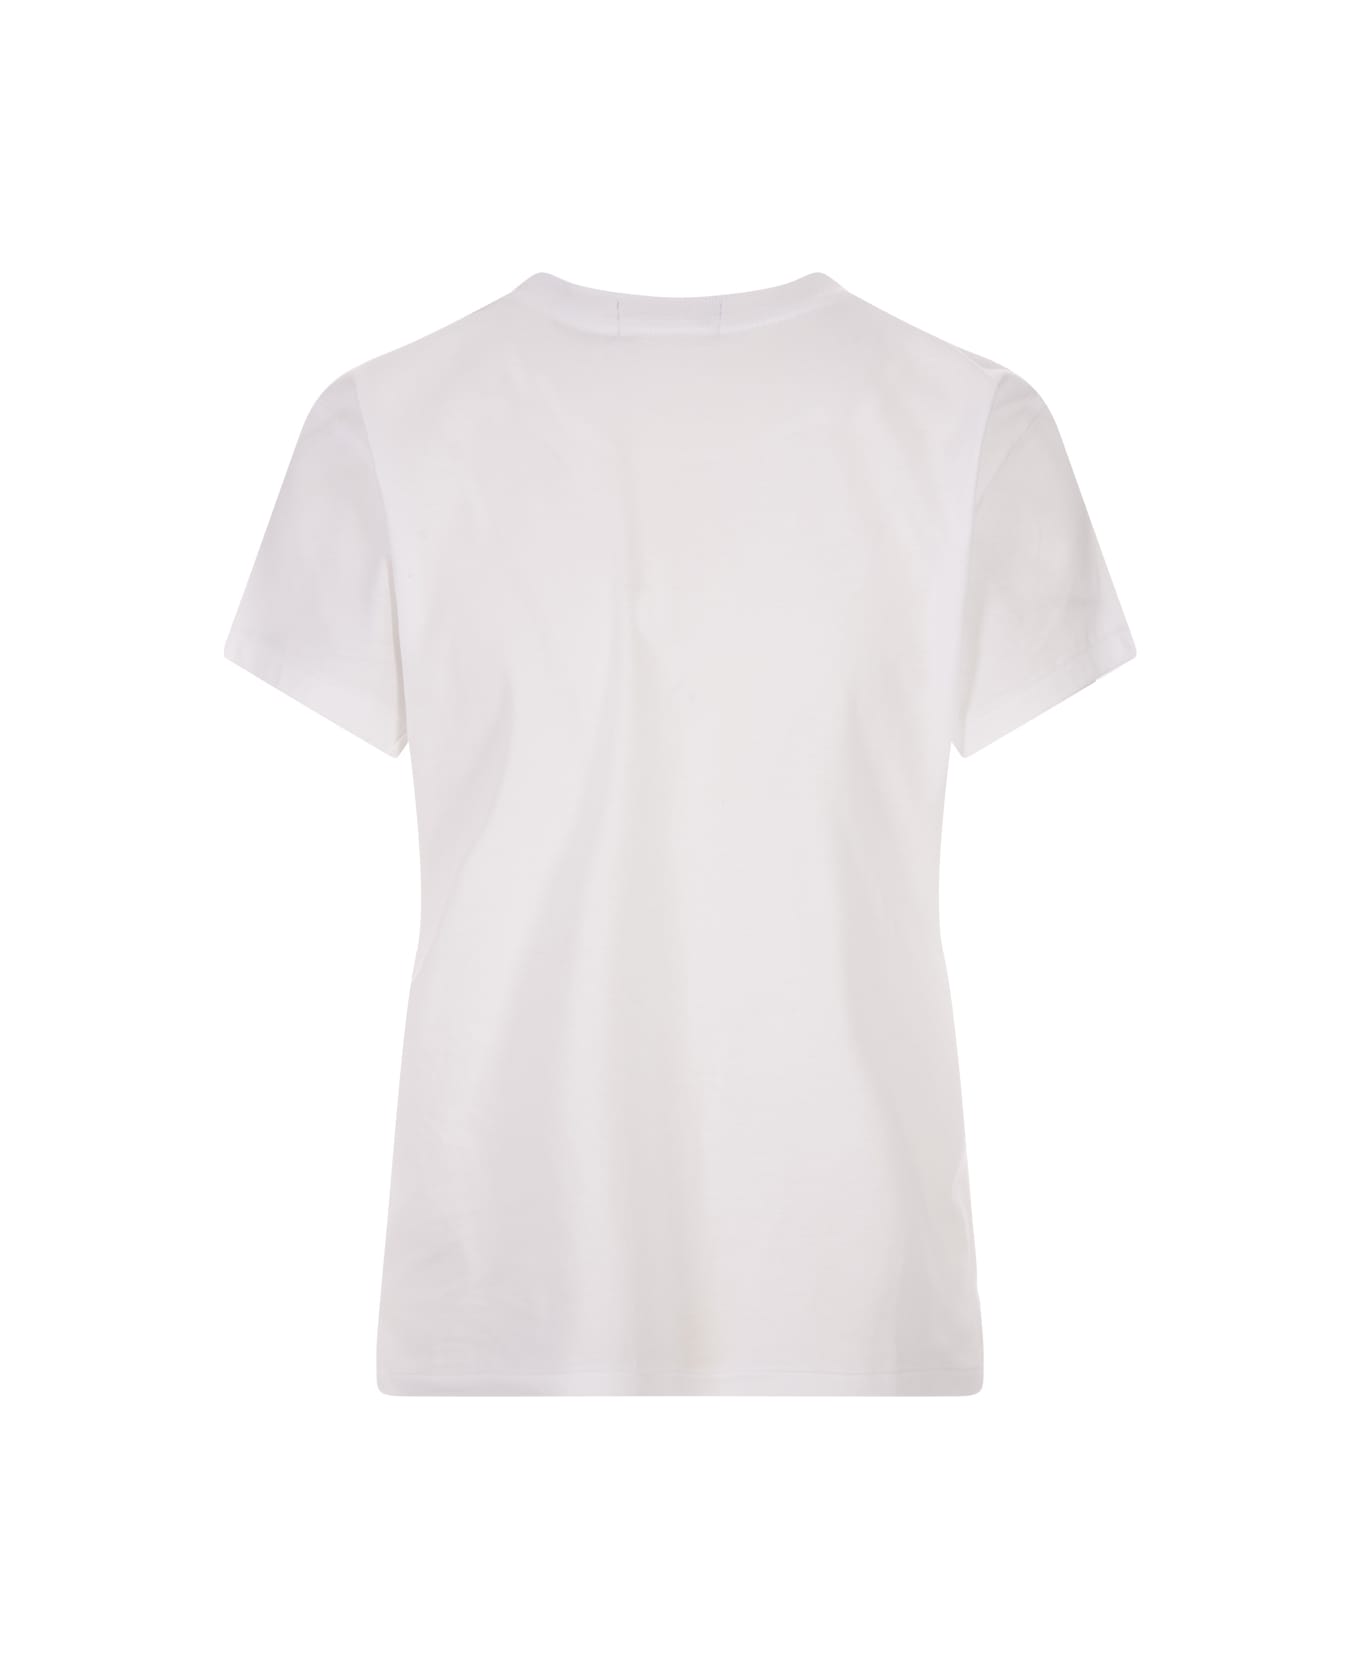 Ralph Lauren White T-shirt With Contrasting Pony - White